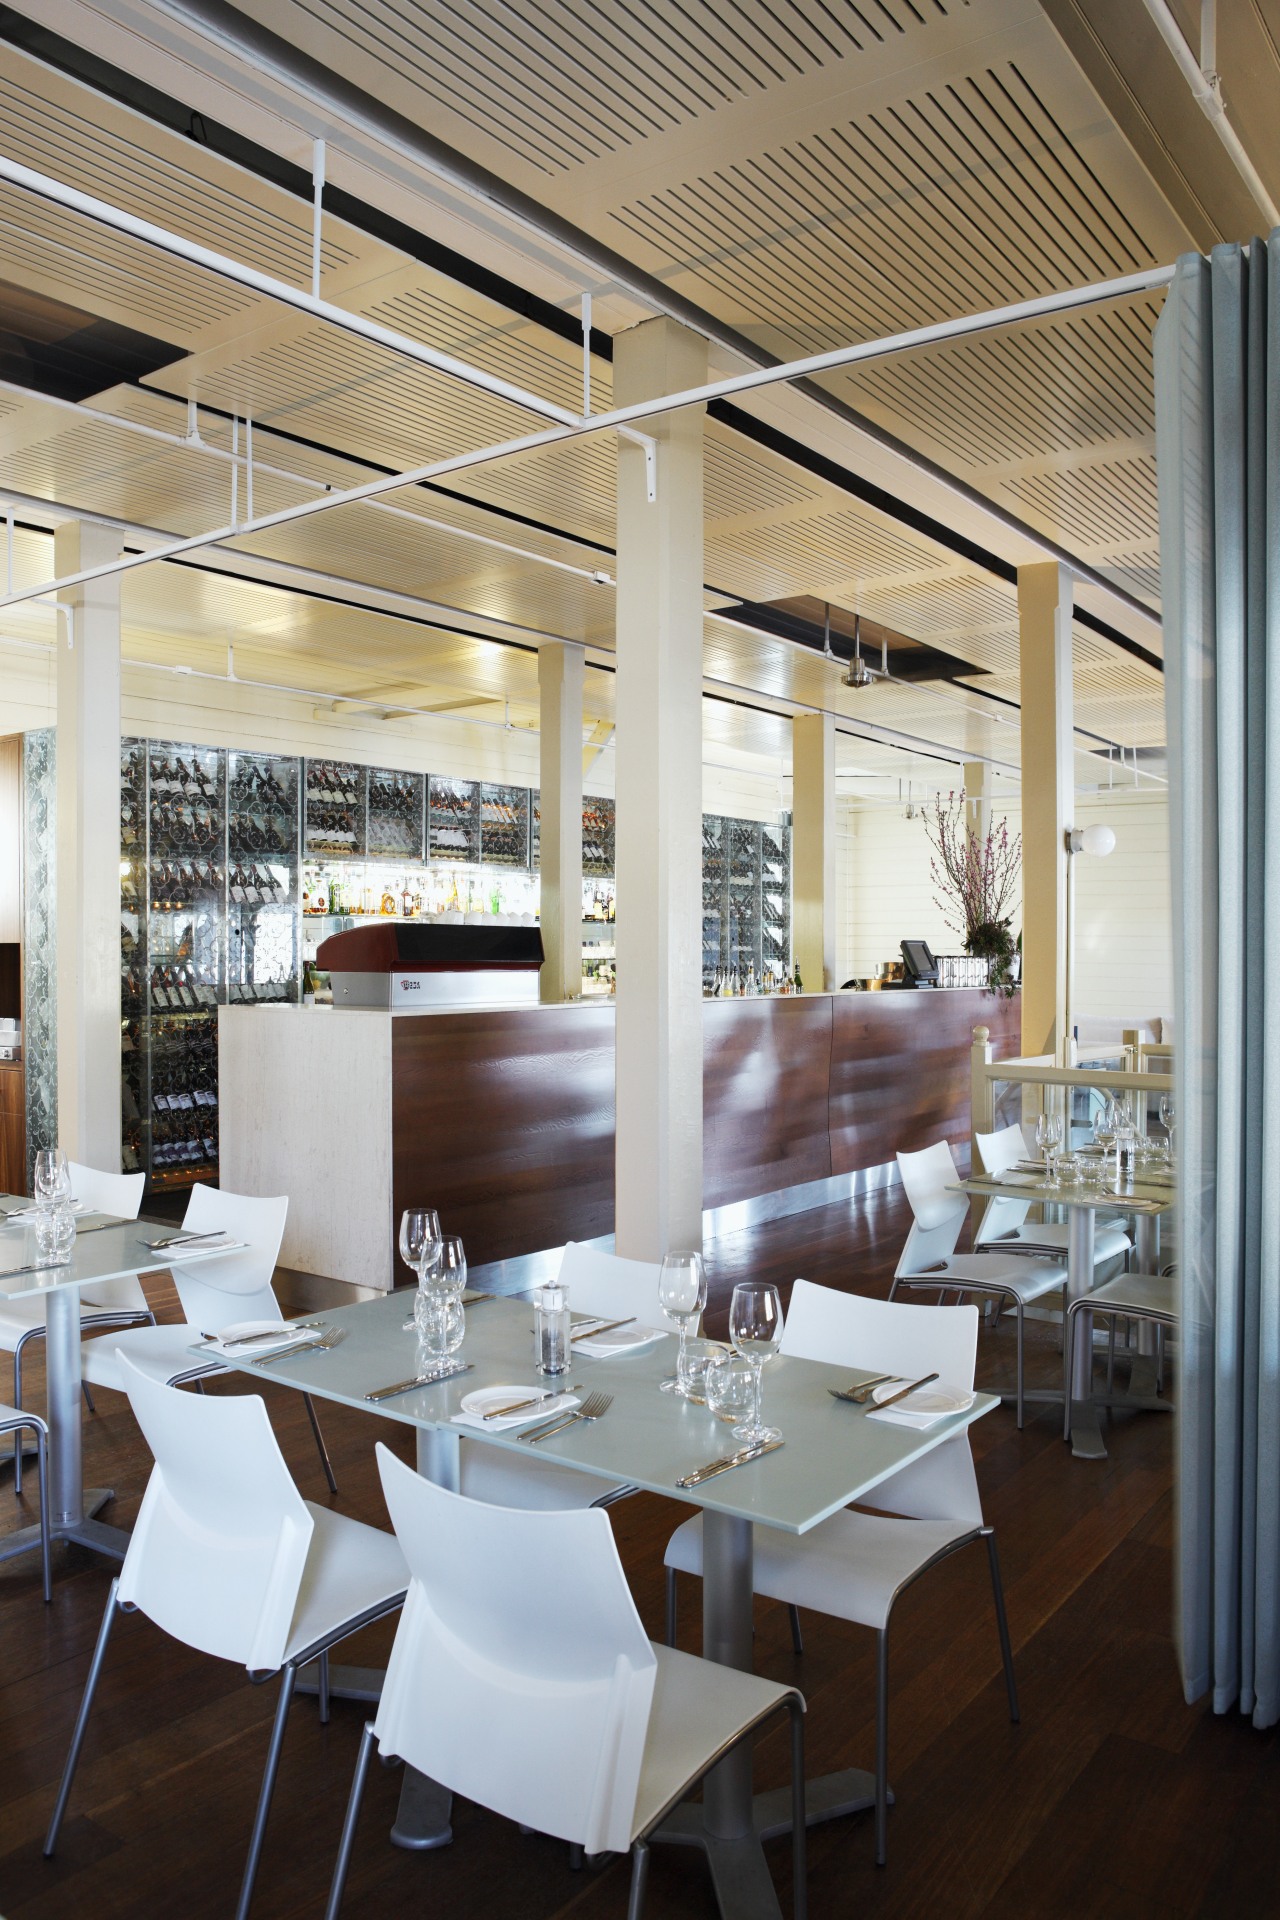 View of a Sydney restaurant which features a architecture, café, ceiling, chair, dining room, furniture, interior design, restaurant, table, gray